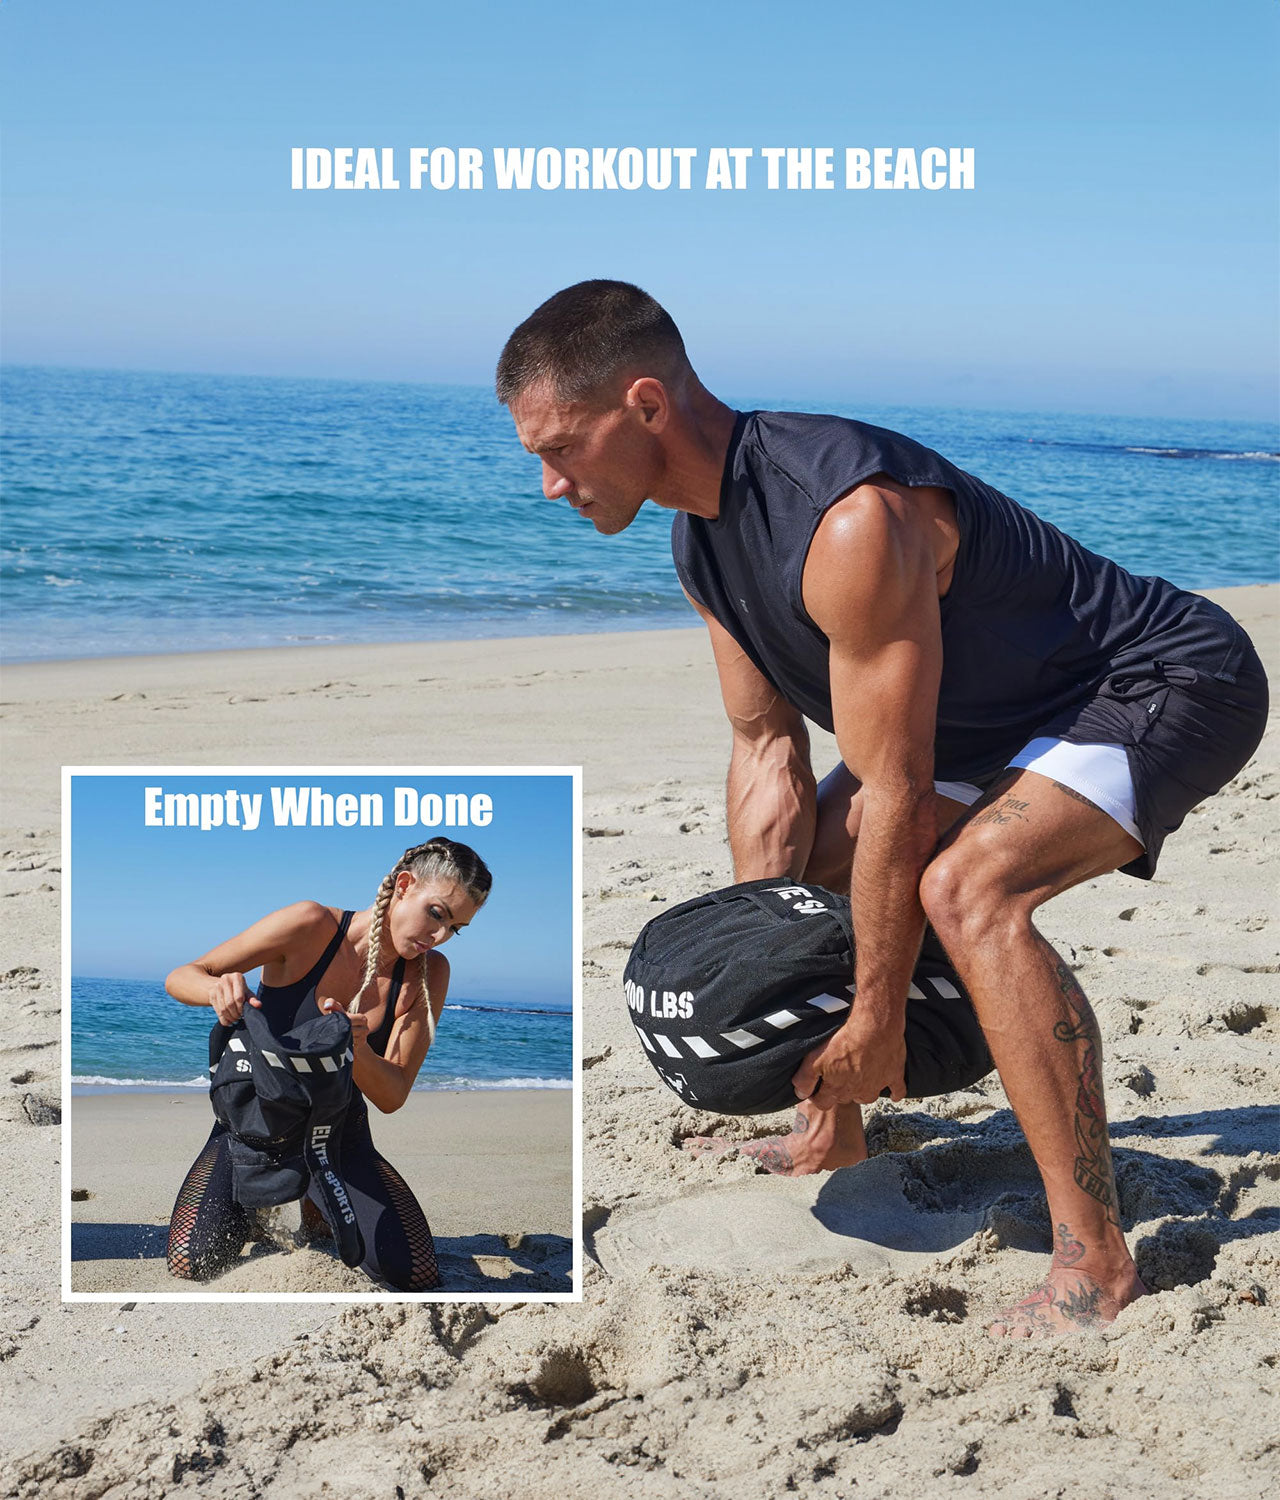 Elite Sports Set of 3 - Core Round Workout Sandbags Ideal For Workout At the Beach